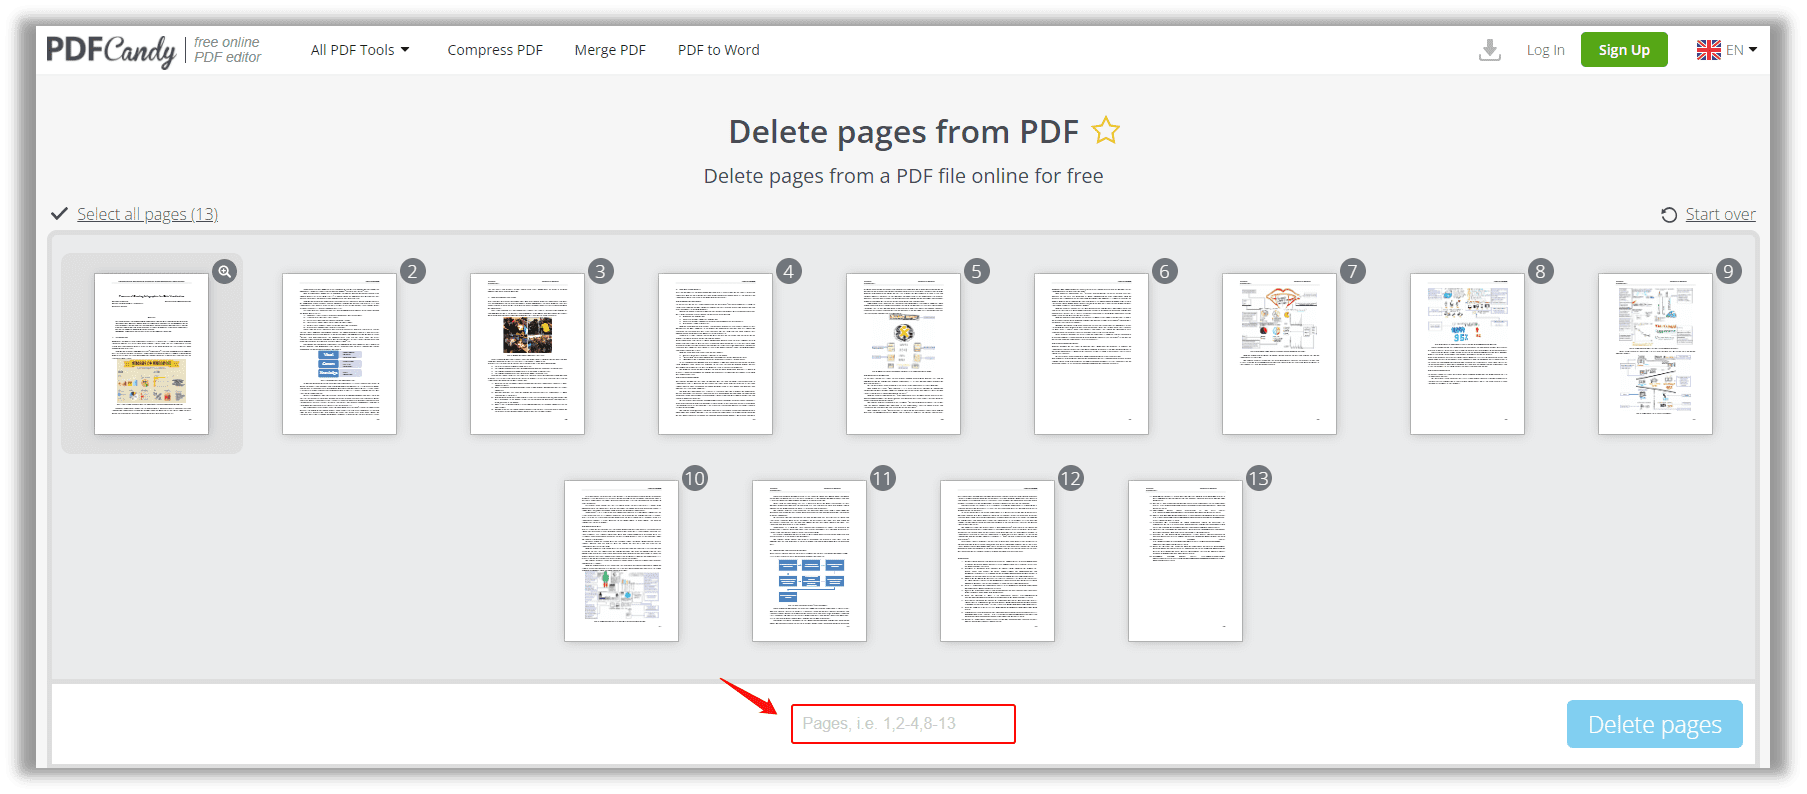 How to delete PDF pages online in PDF Candy